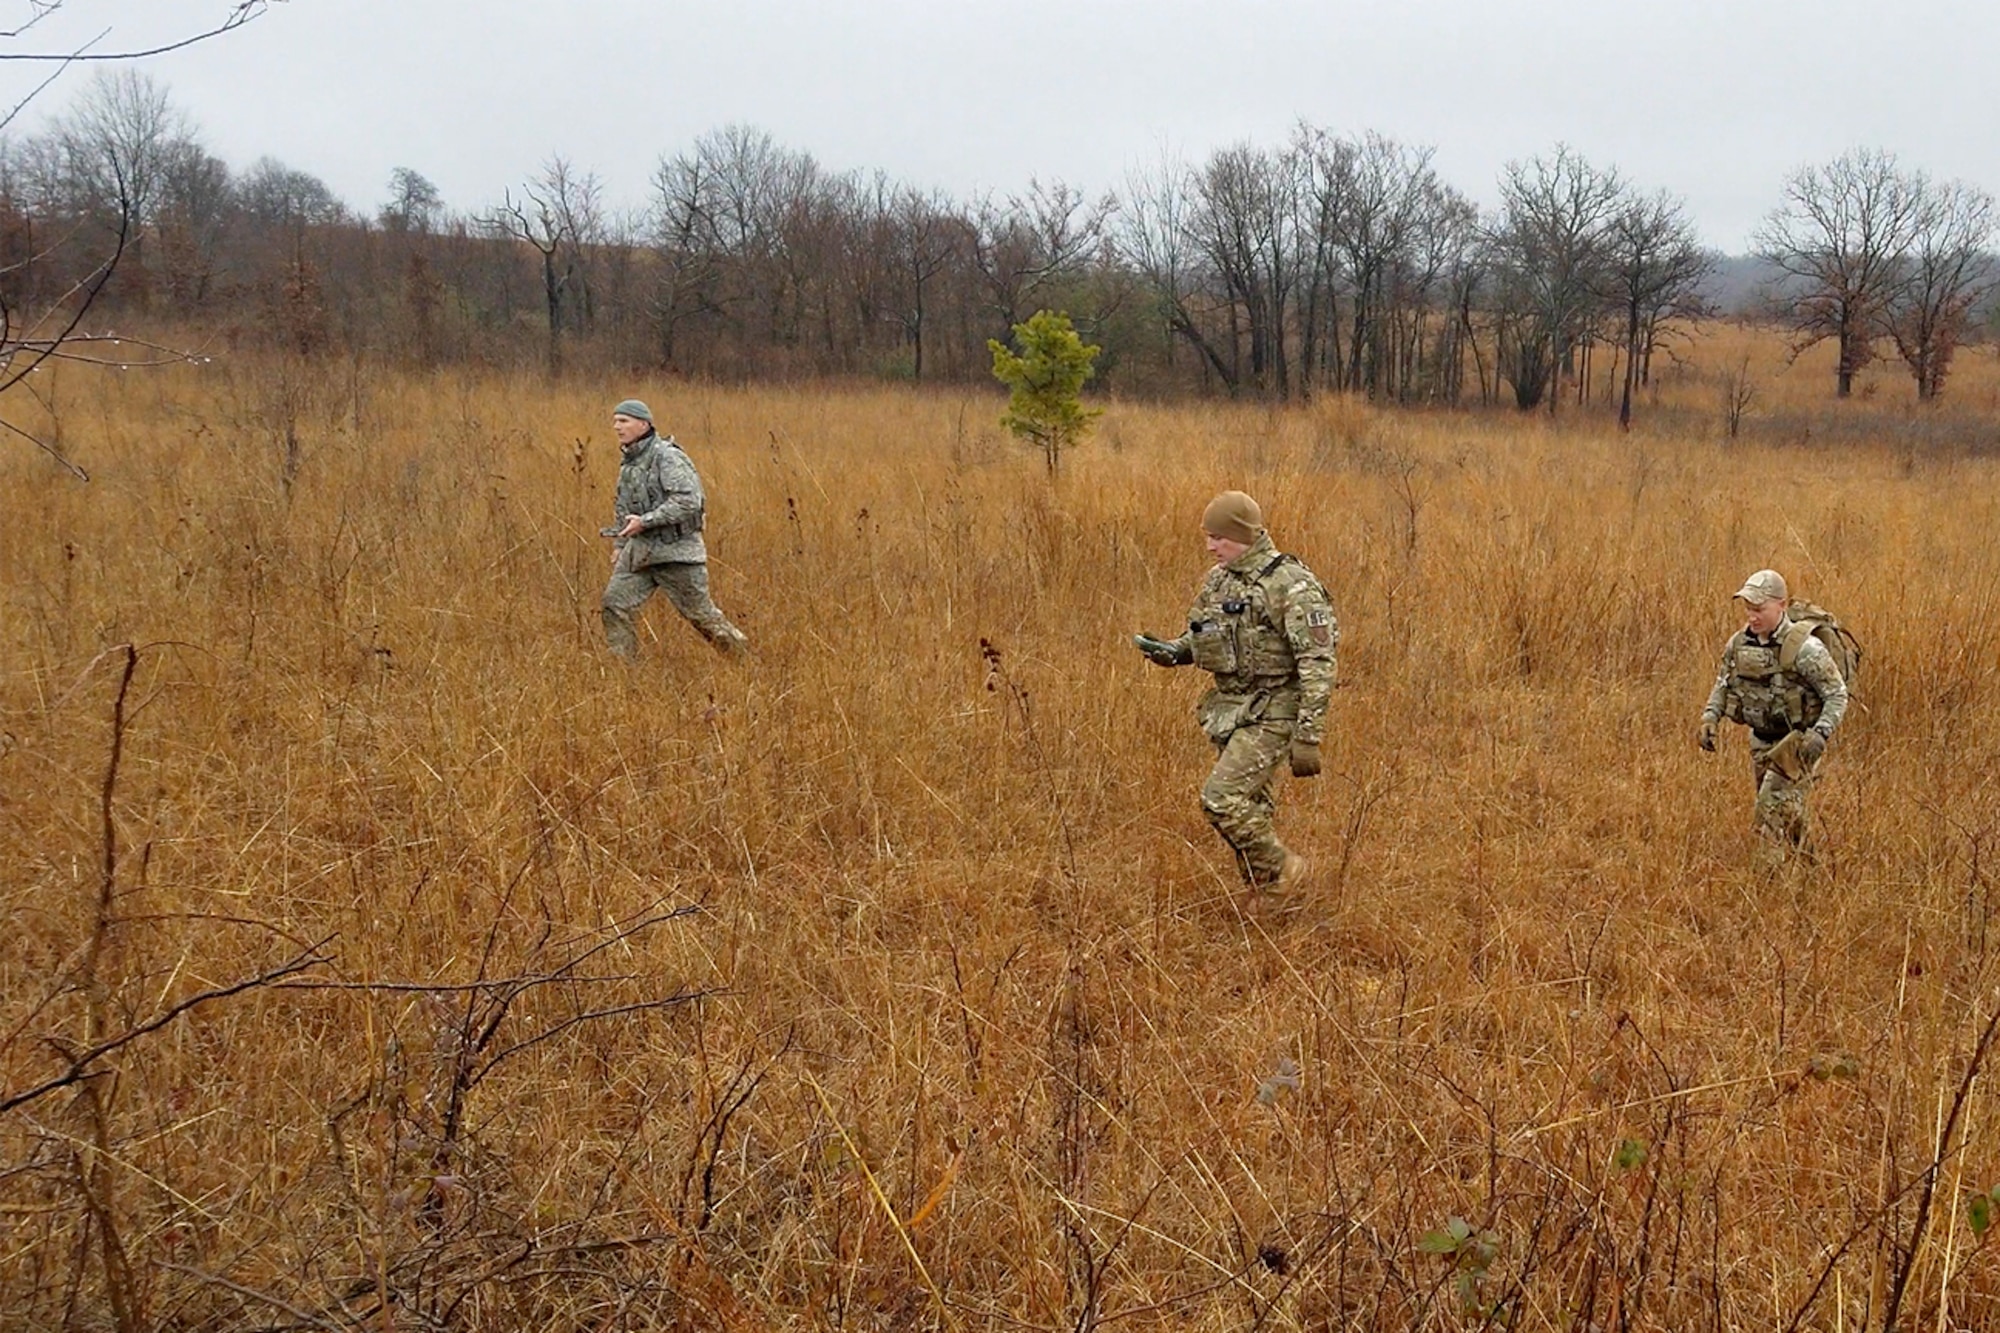 Senior Master Sgt. Bradley Rose, 185th Security Forces Squadron (from left), Master Sgt. Gregory Wardle, 153rd SFS, and Staff Sgt. Jonathan Finer, 124th SFS, tackle a land navigation course Jan. 23, 2020, at Ft. Chaffee, Arkansas. The team of Airmen from across the Air National Guard gathered to train for the Air Force Defender Challenge, a security forces skills competition. (U.S. Air National Guard photo by Master Sgt. Chauncey Reed)